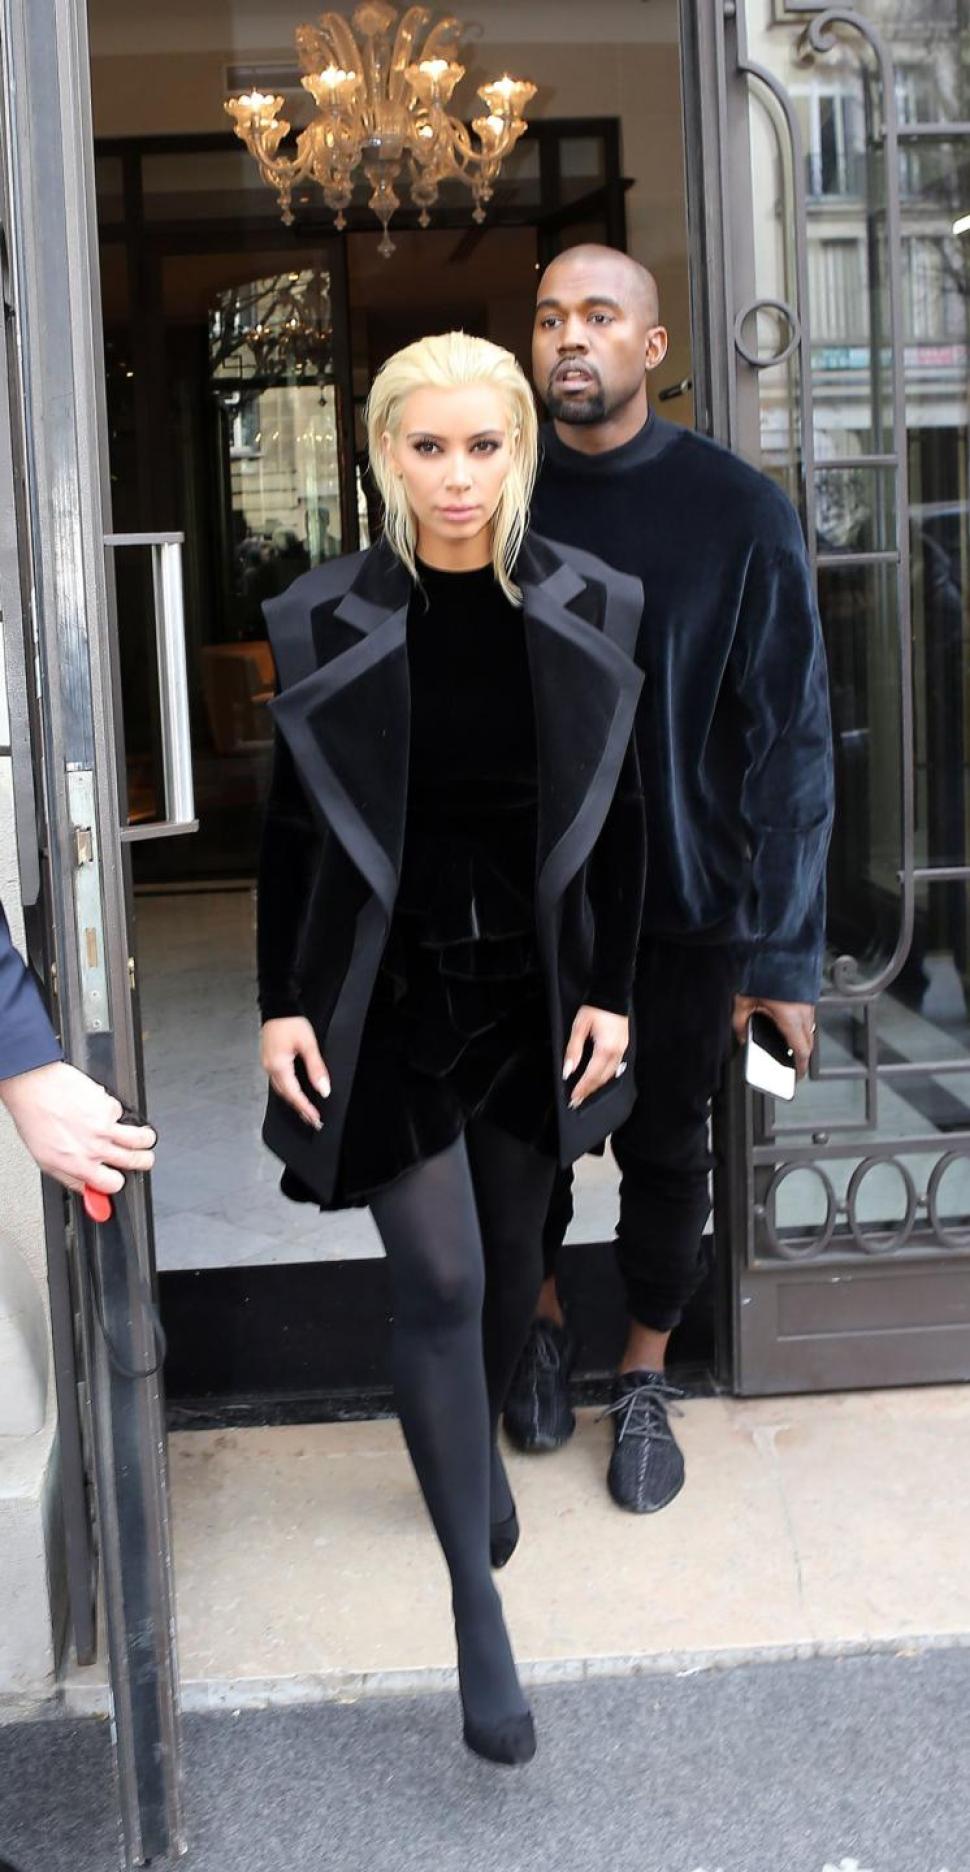 Kim Kardashian has gone platinum blond! The reality star debuted her new hair in Paris Thursday.